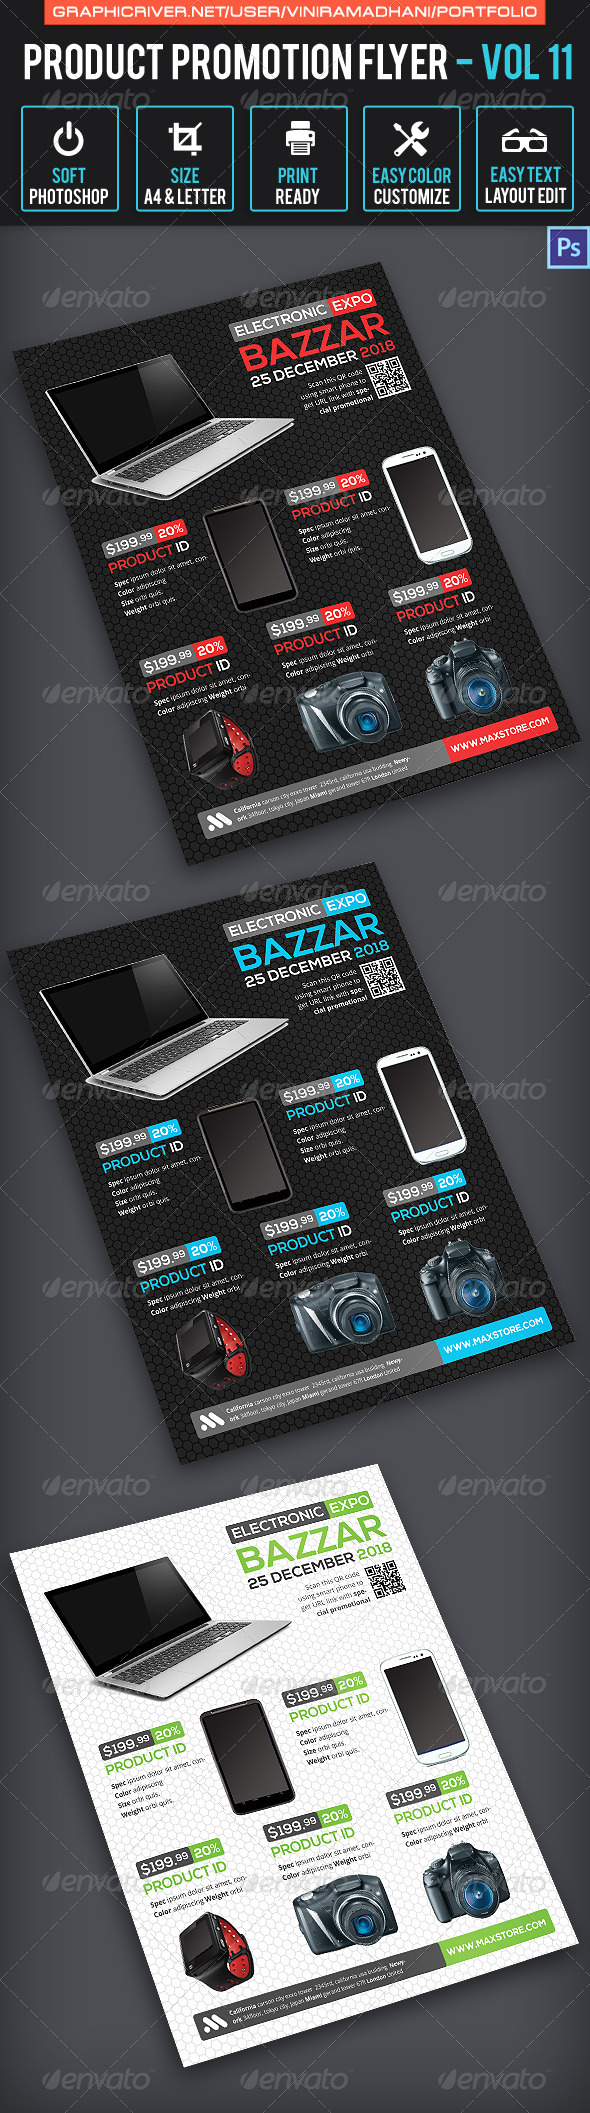 GraphicRiver Product Promotion Flyer Volume 11 7658099